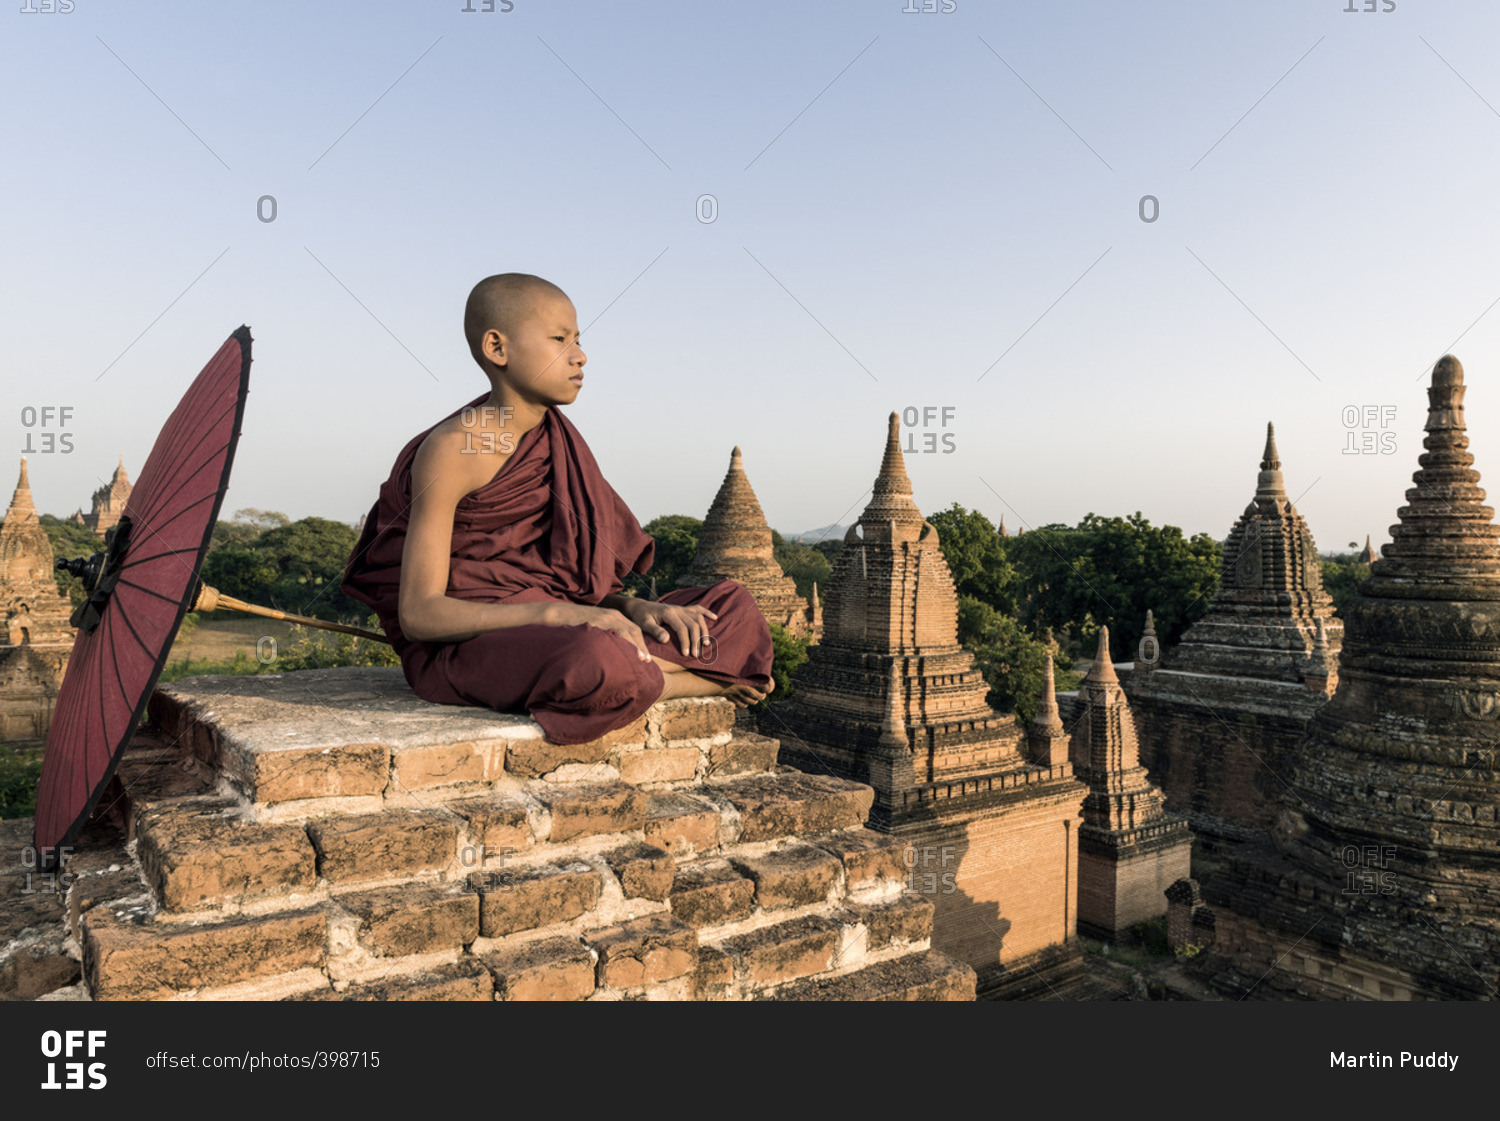 Young Buddhist monk overlooking ancient temples while holding traditional parasol